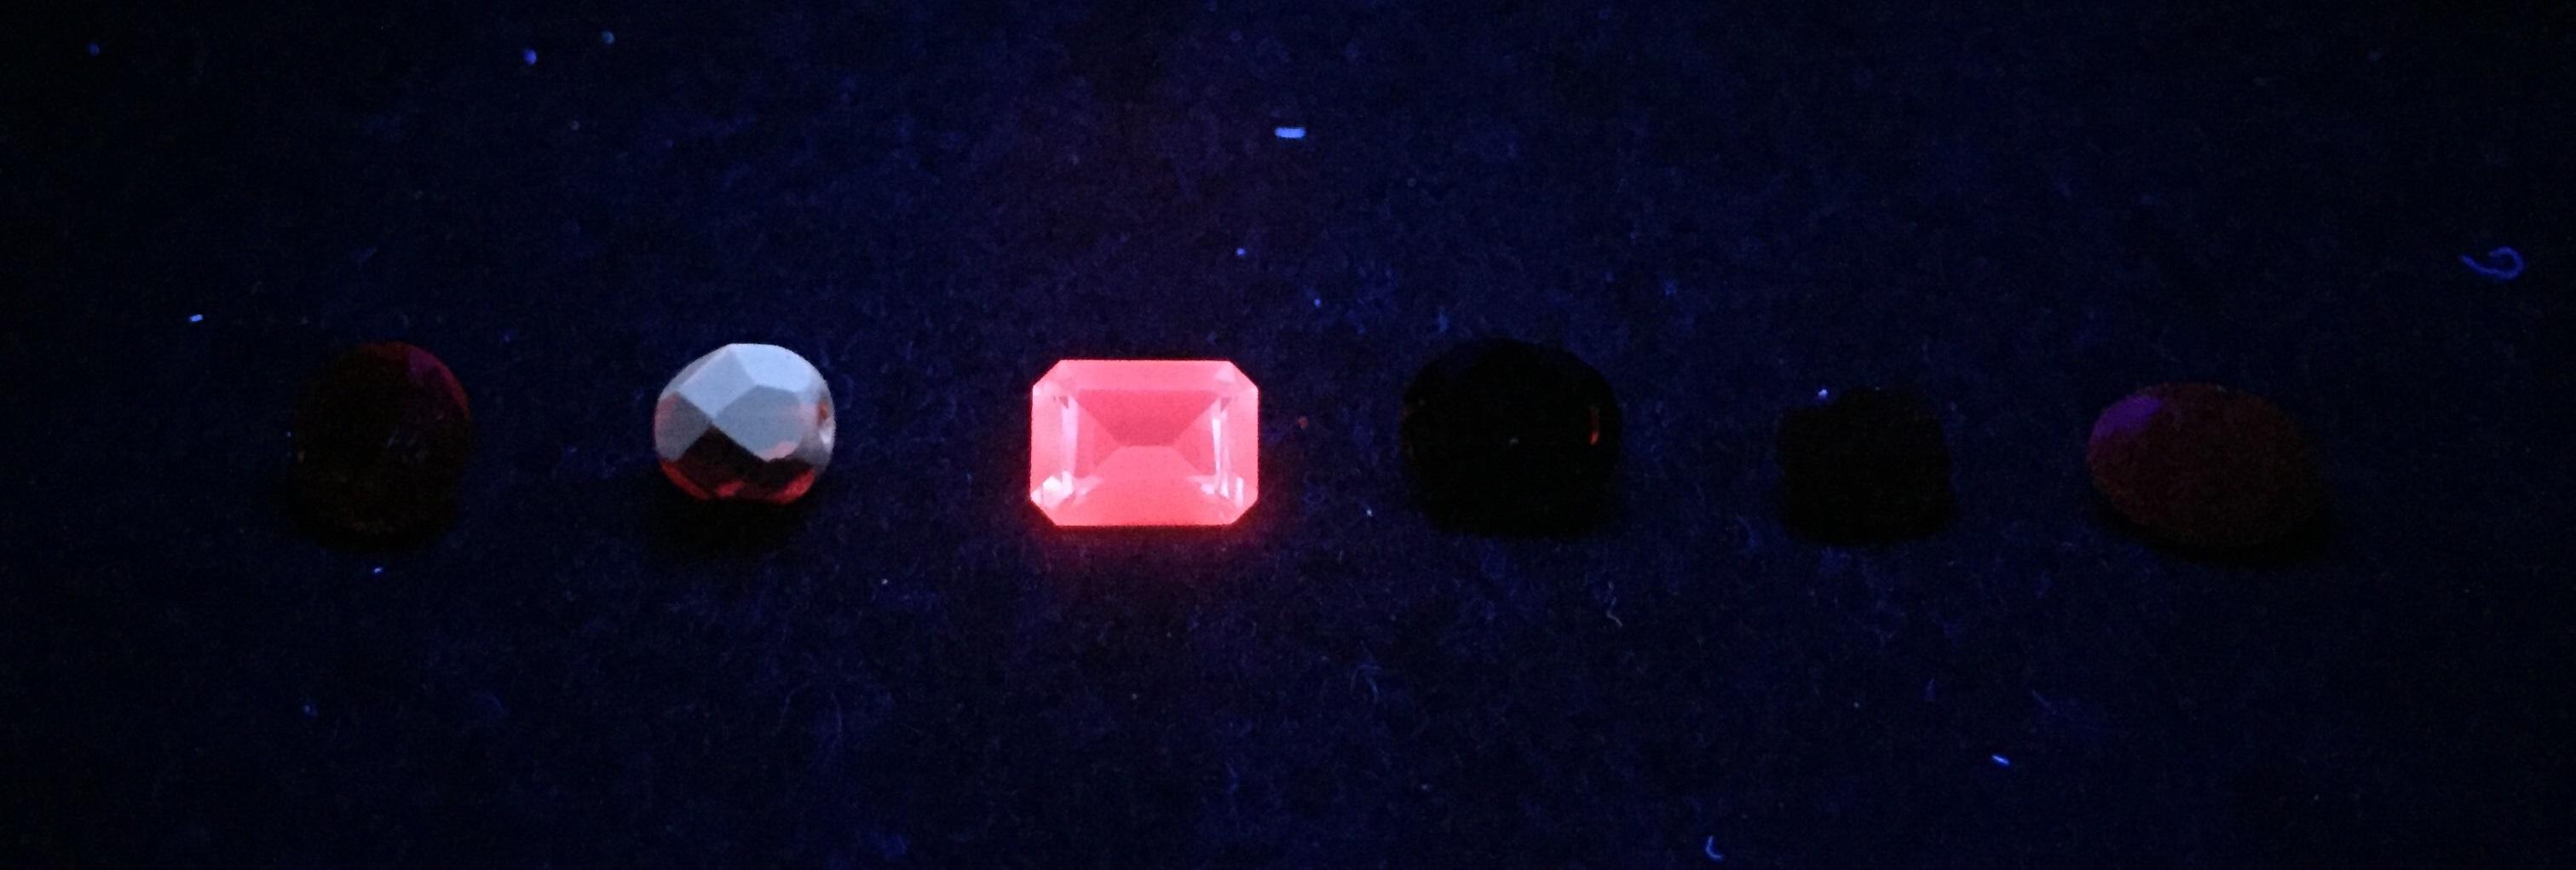 Focus on Gemstone Fluorescence: Looking for the Light - - C red SWUV